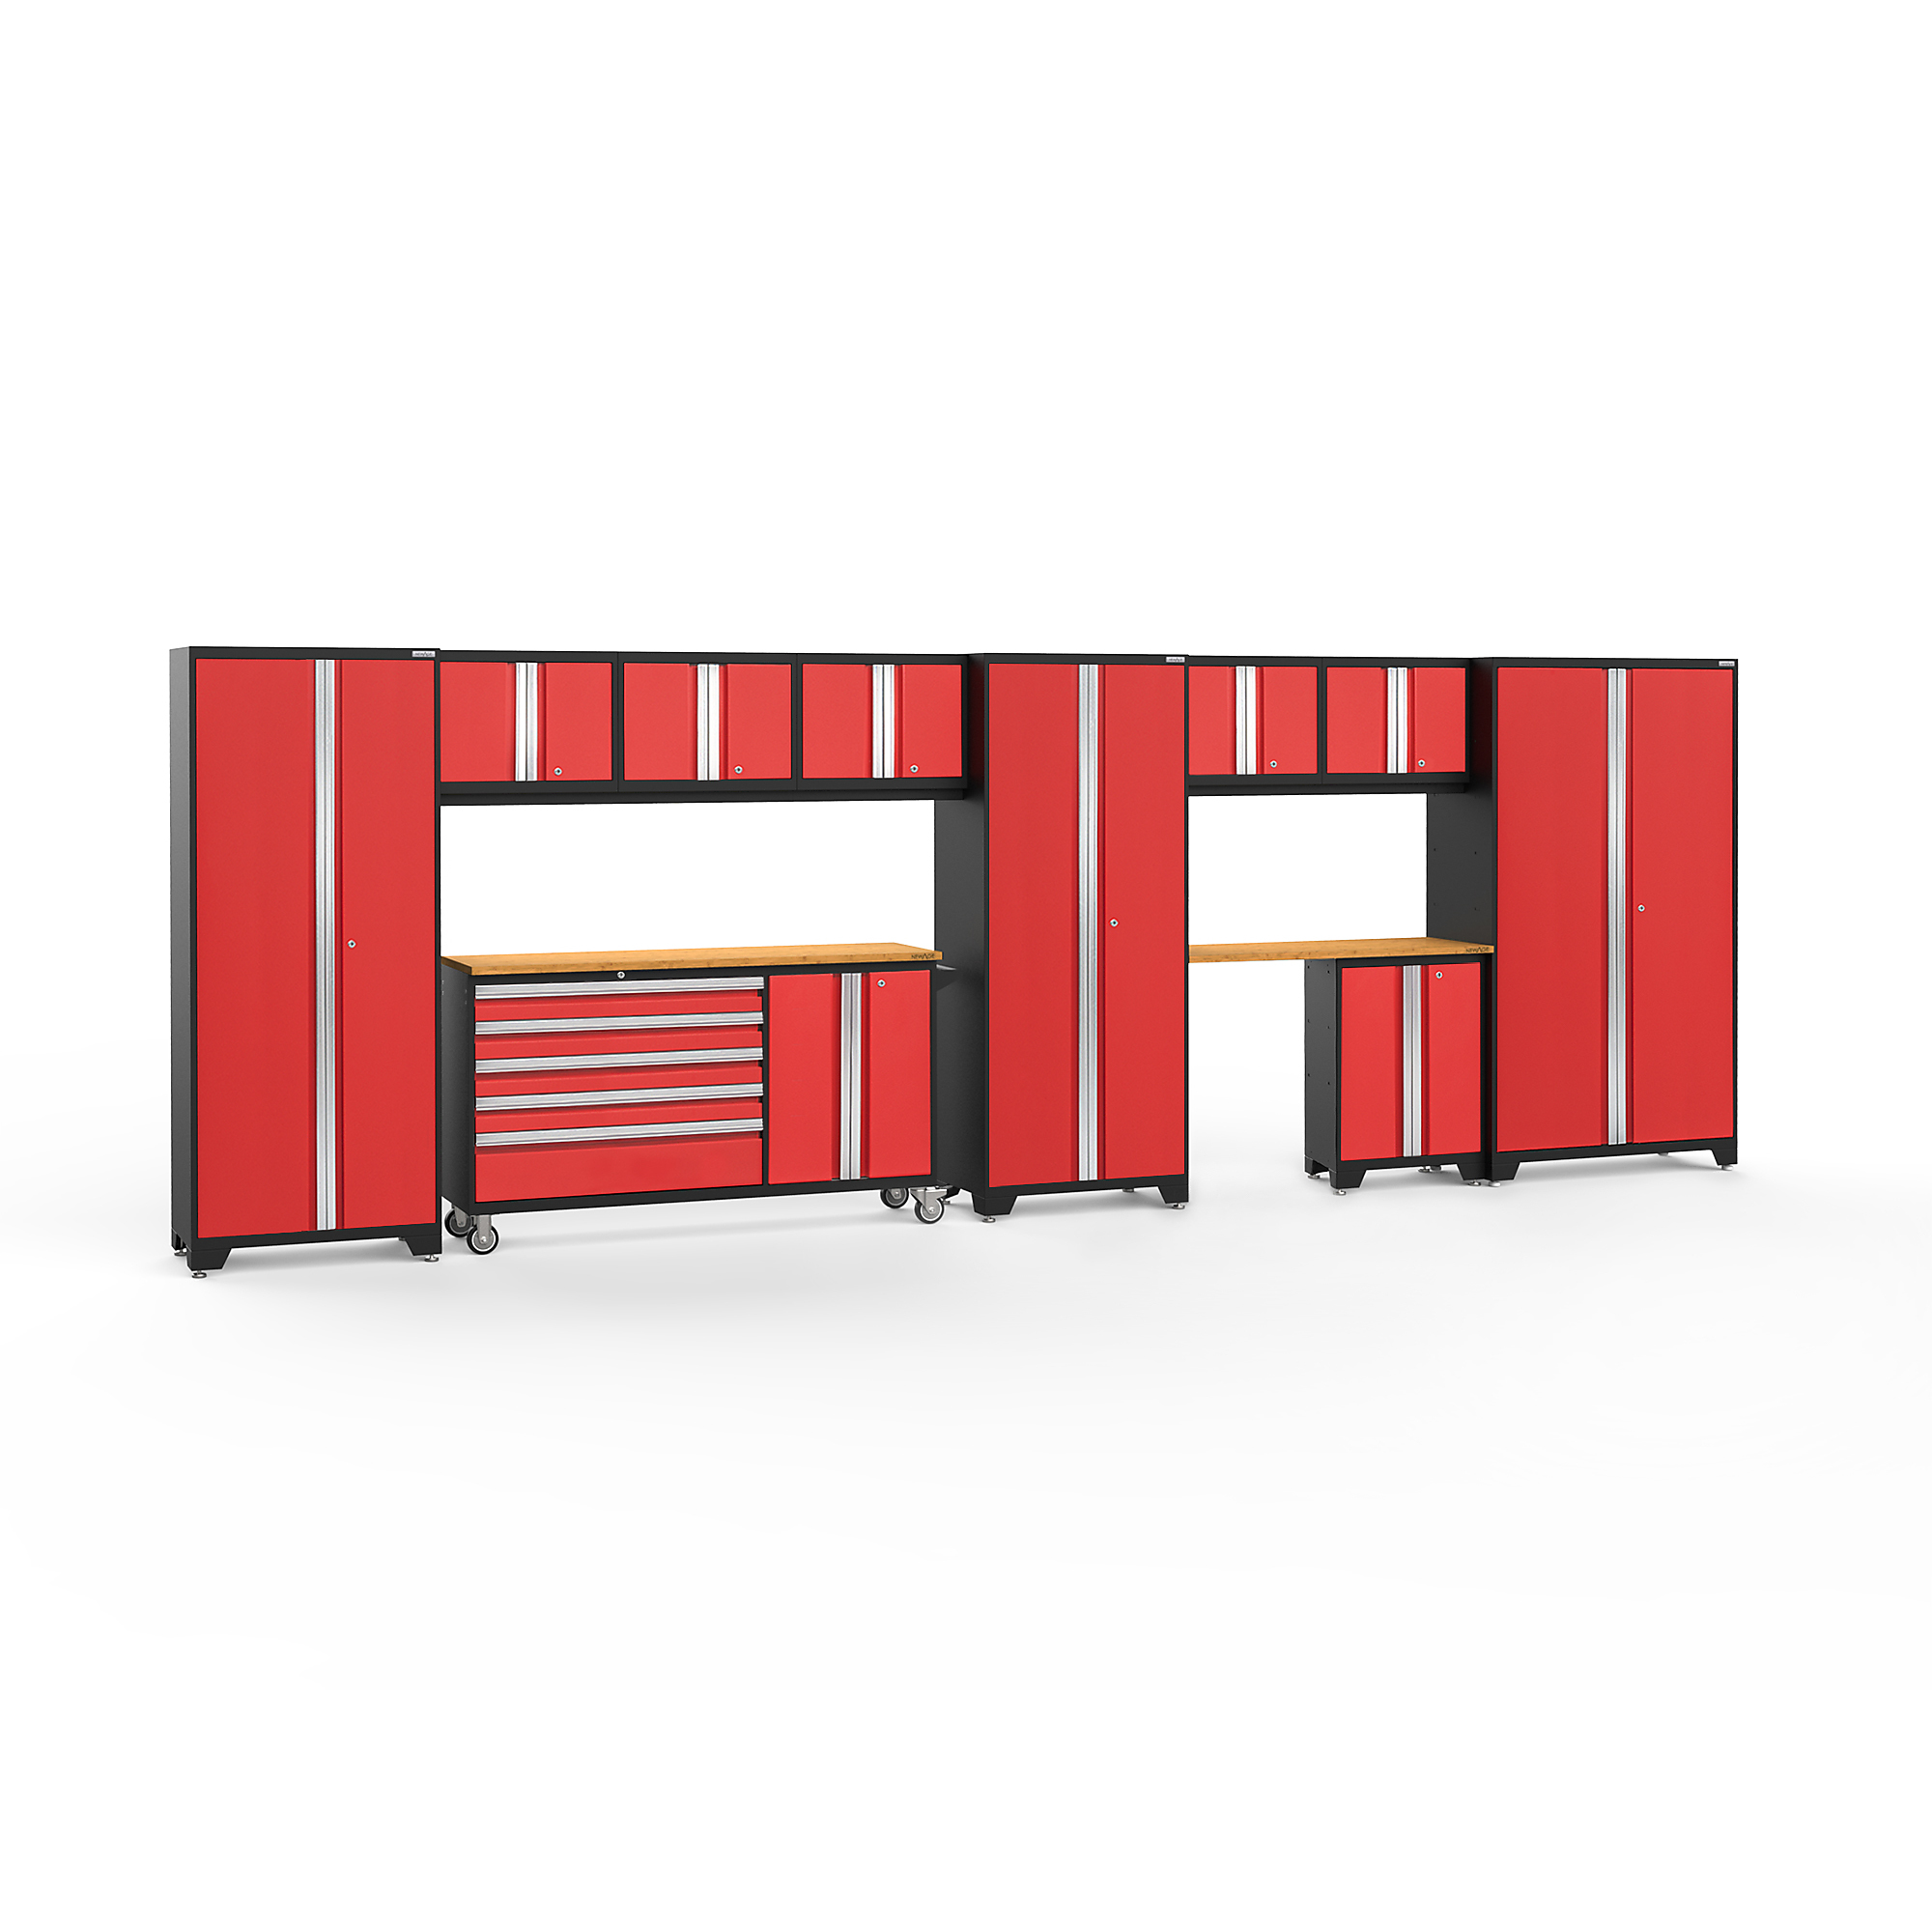 NewAge Products, Bold Series Red 11-Piece Steel Garage Cabinet Set, Width 222 in, Height 77.25 in, Depth 18 in, Model 56449